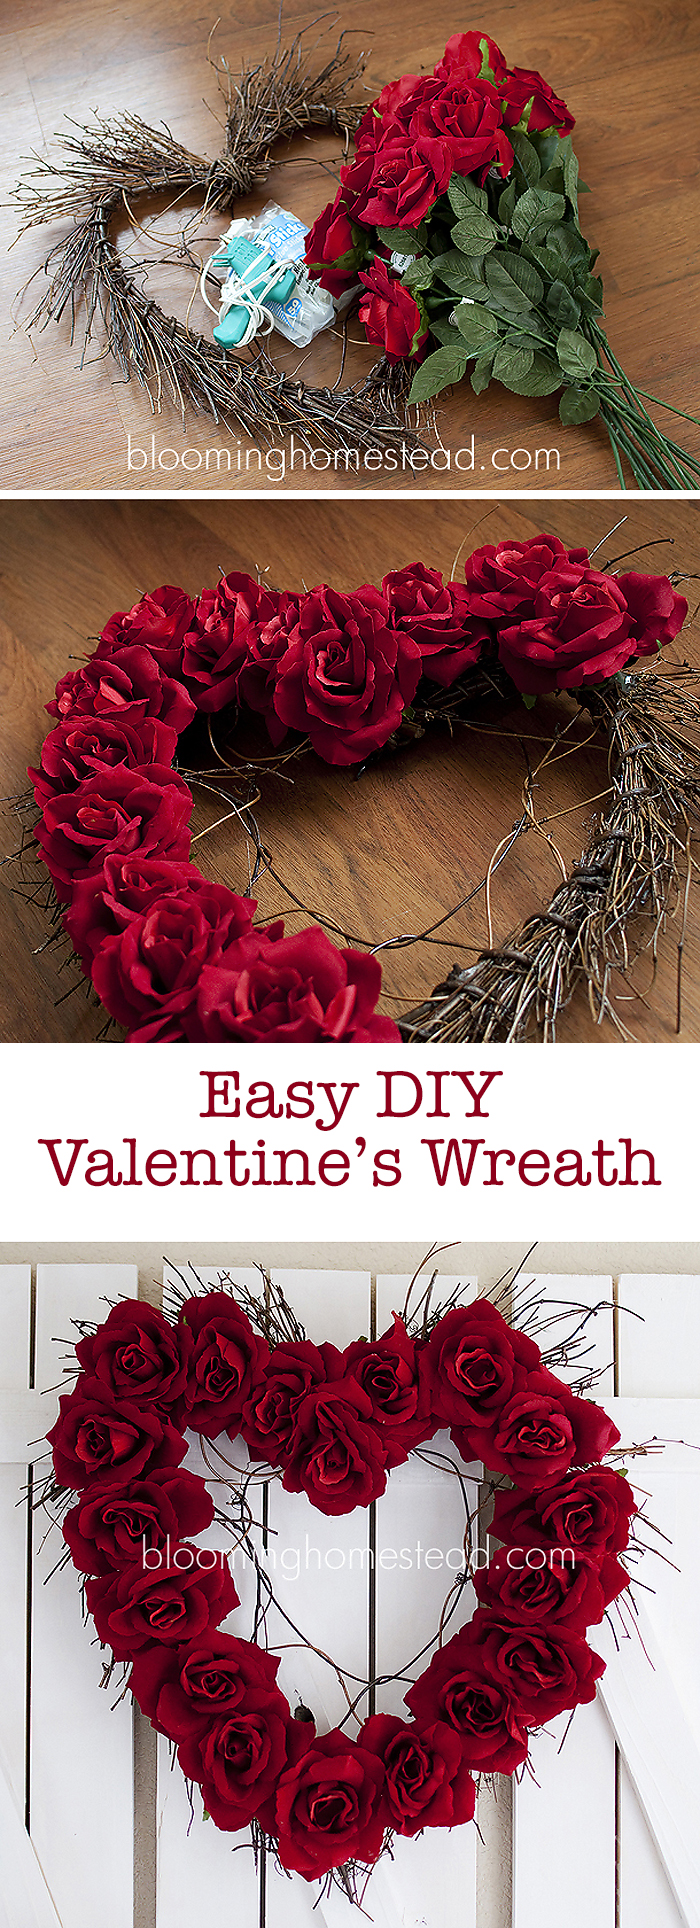 DIY Valentine Wreath that is so easy to make and oh so pretty